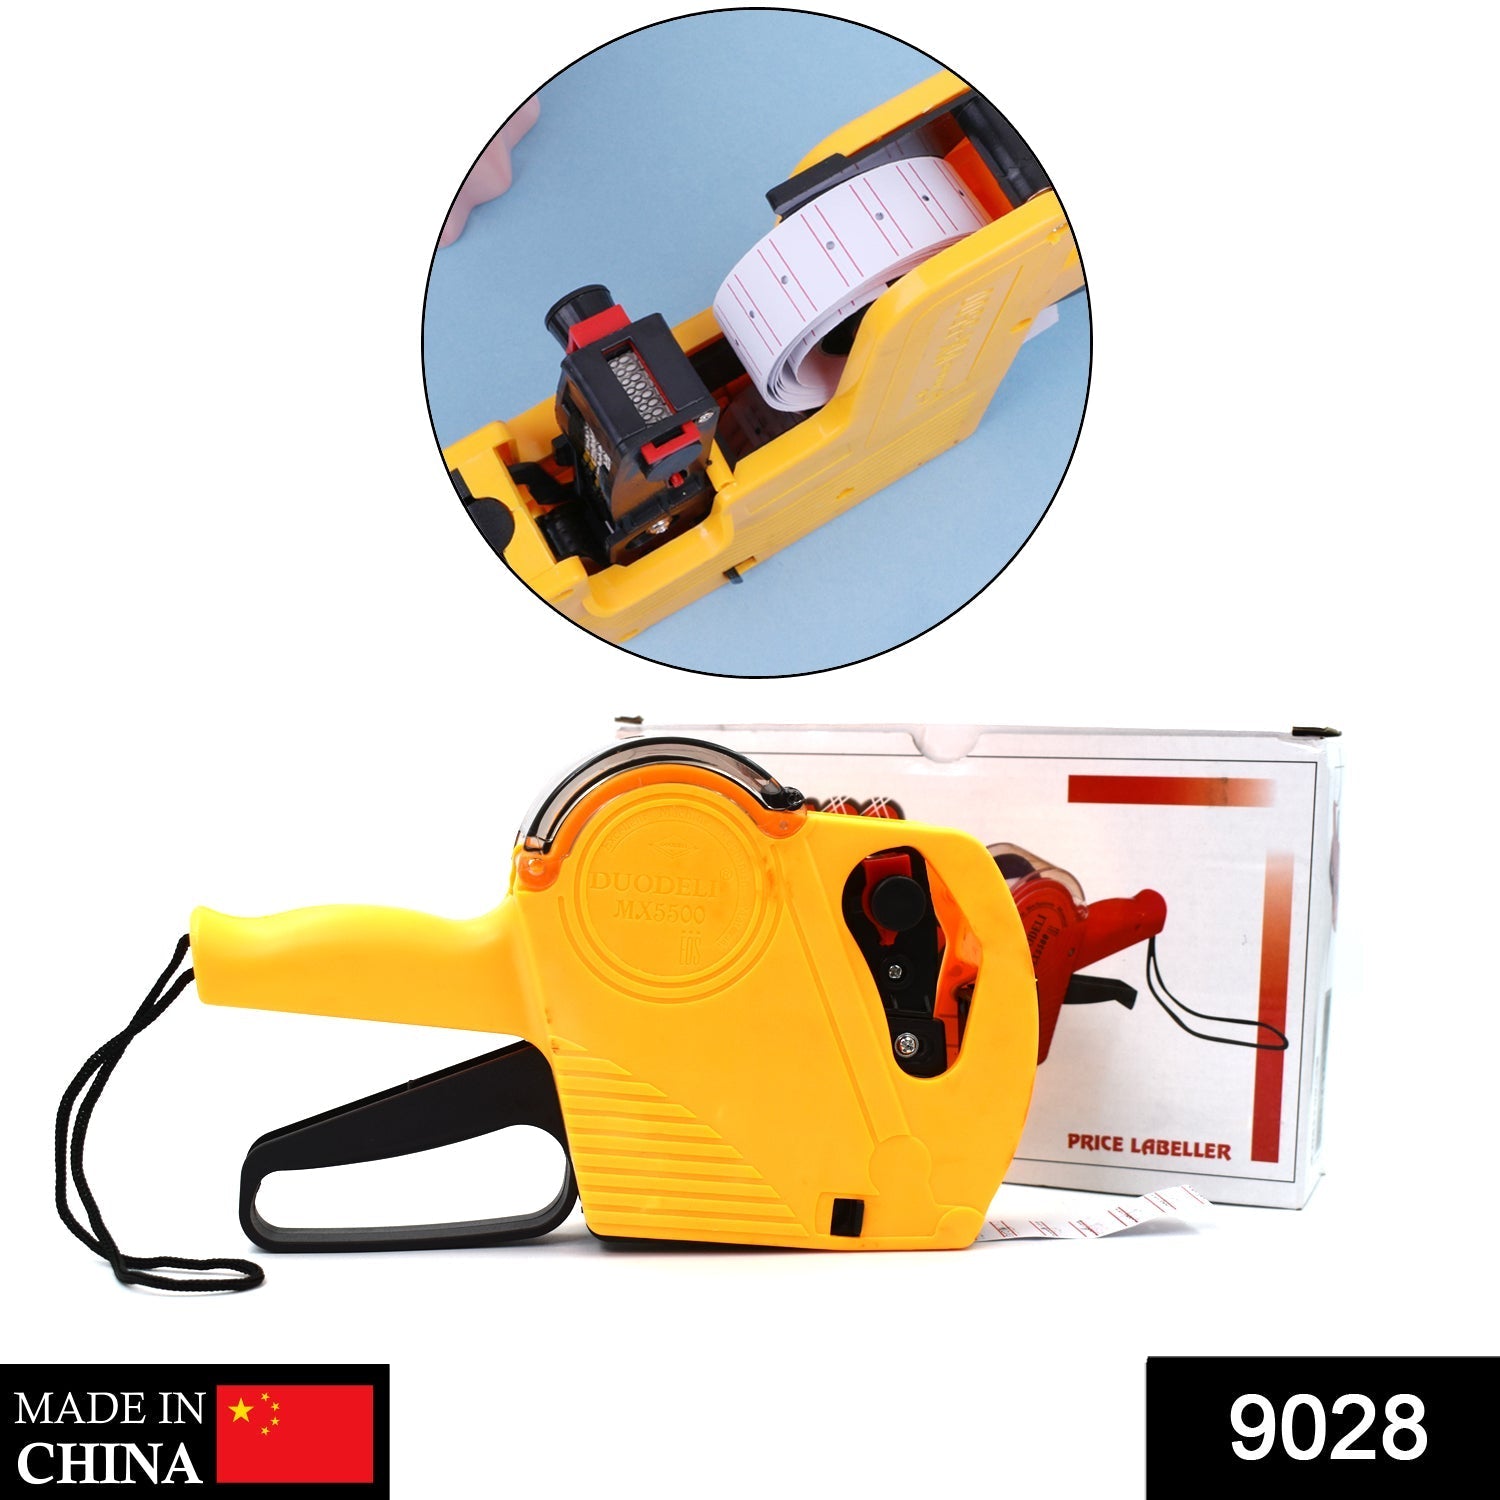 9028 Price Labeller Gun widely used in departmental stores and markets for price tagging among customers.